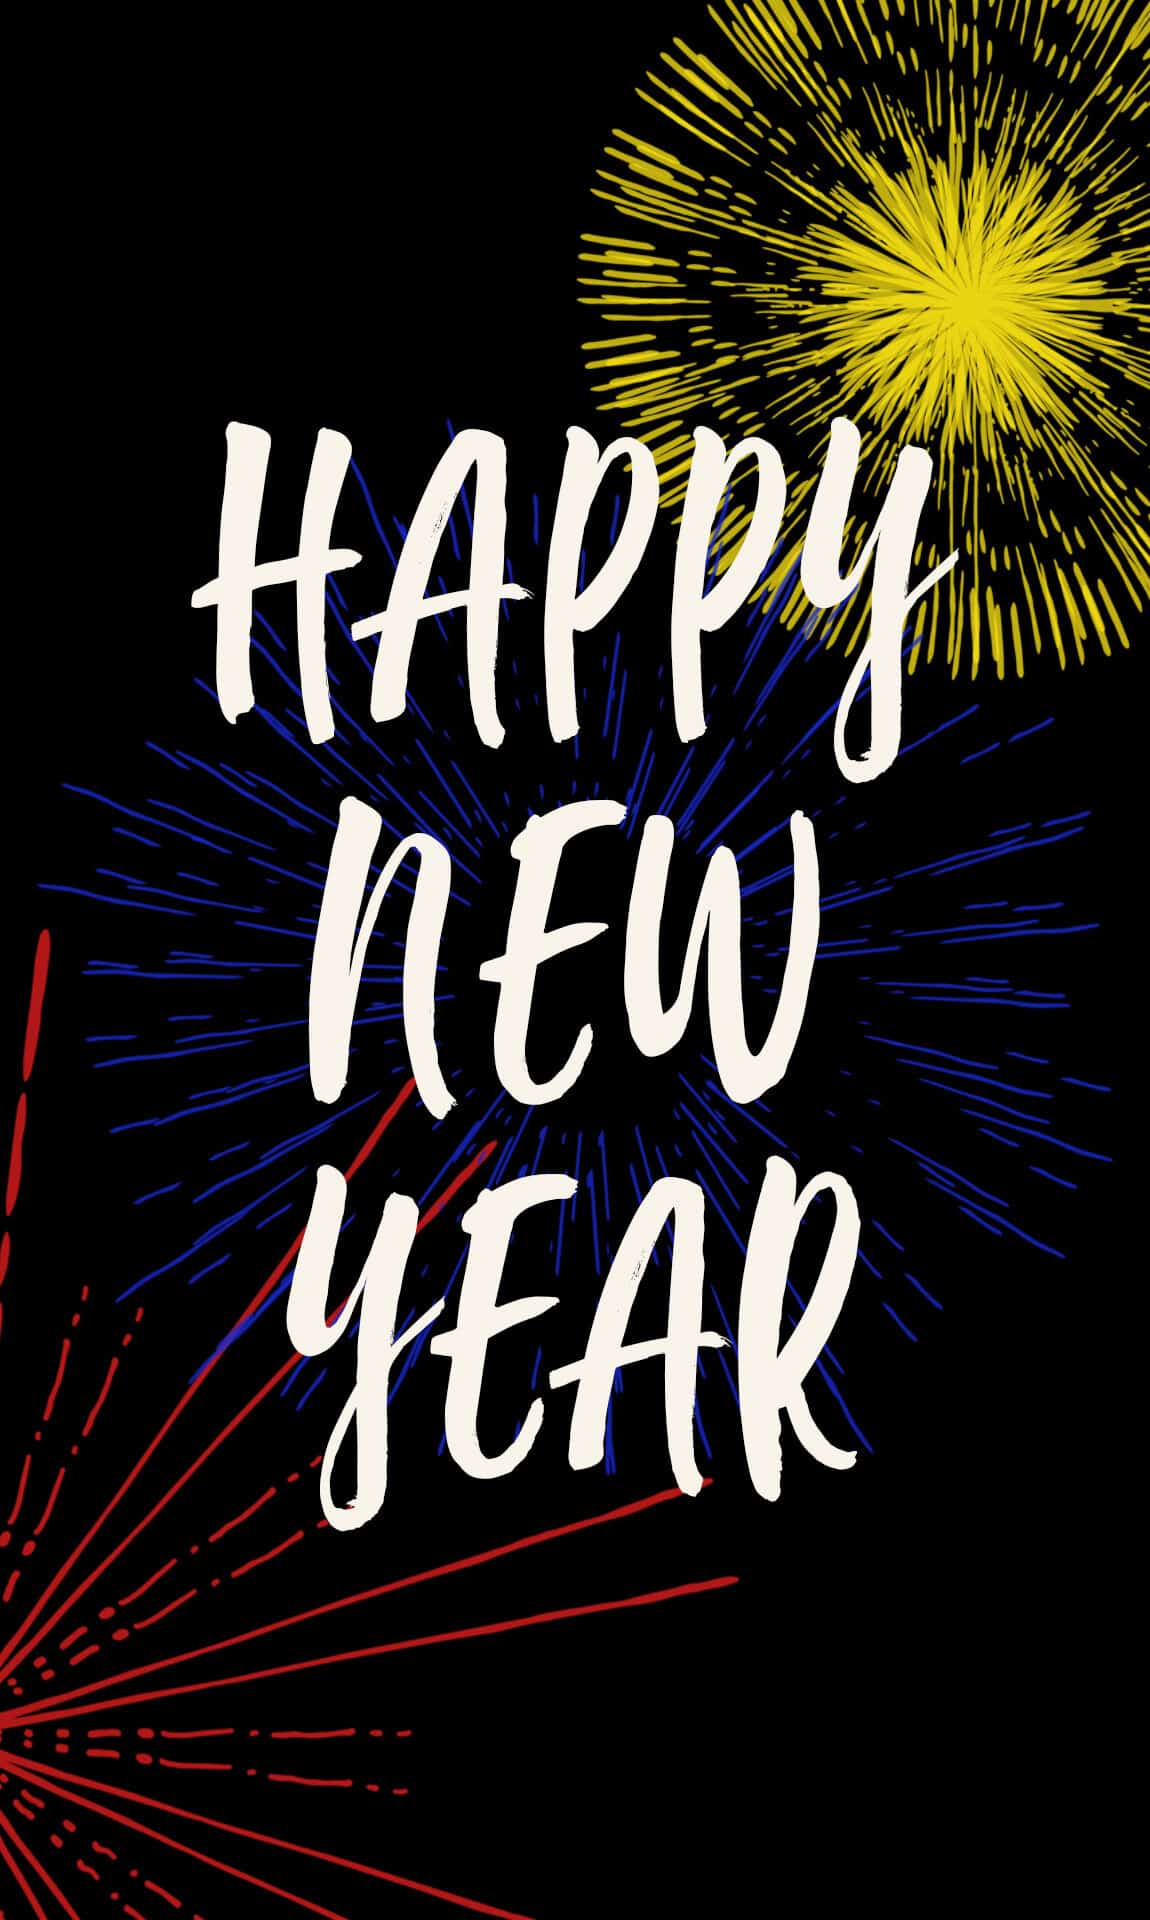 Happy New Year from the Vision Online Staff.